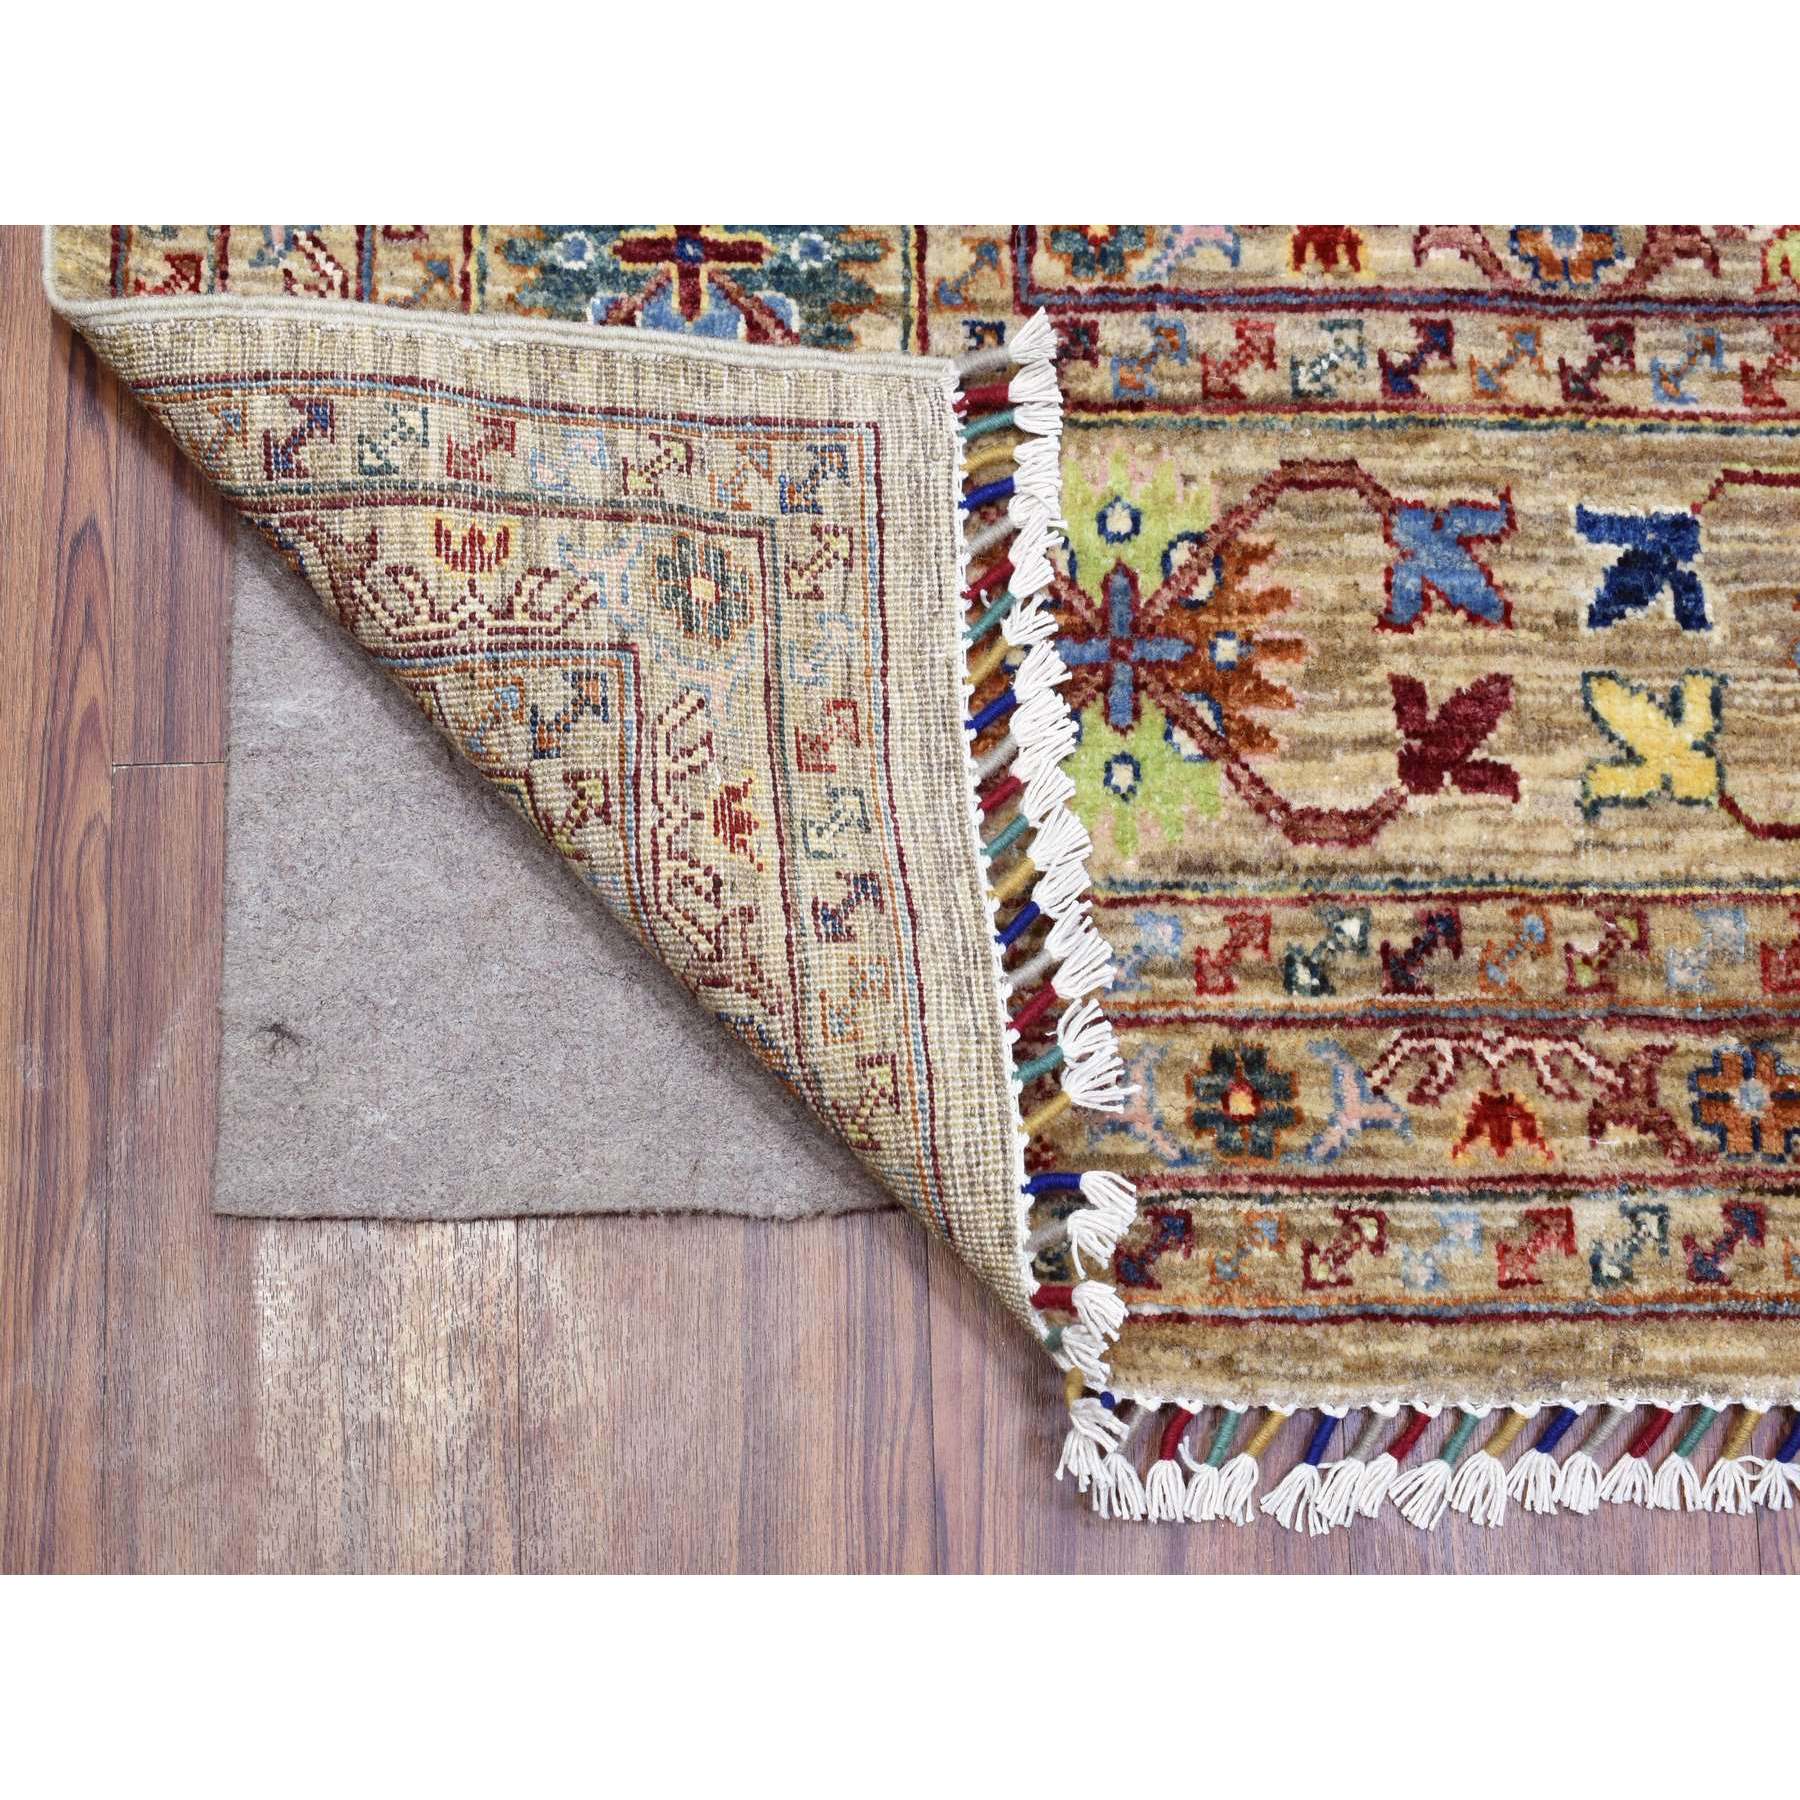 9'x12'2" Taupe, Afghan Super Kazak with Repetitive Caucasian Gul Design, Natural Dyes Densely Weave, Soft and Velvety Wool Hand Woven, Oriental Rug 